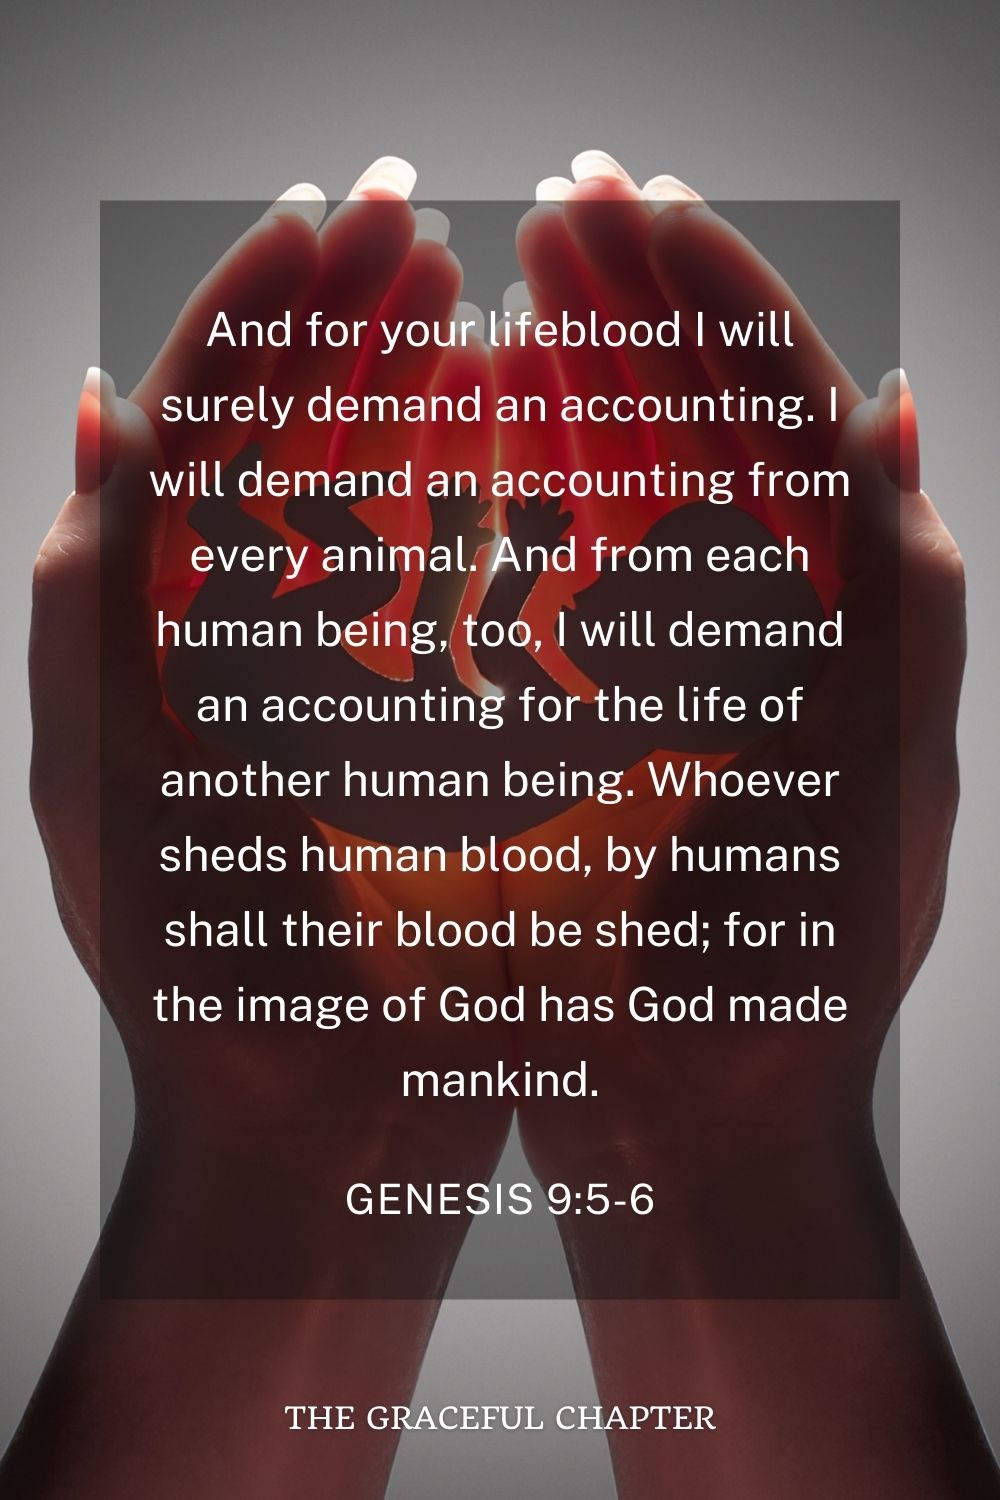 And for your lifeblood I will surely demand an accounting. I will demand an accounting from every animal. And from each human being, too, I will demand an accounting for the life of another human being. Whoever sheds human blood, by humans shall their blood be shed; for in the image of God has God made mankind. Genesis 9:5-6